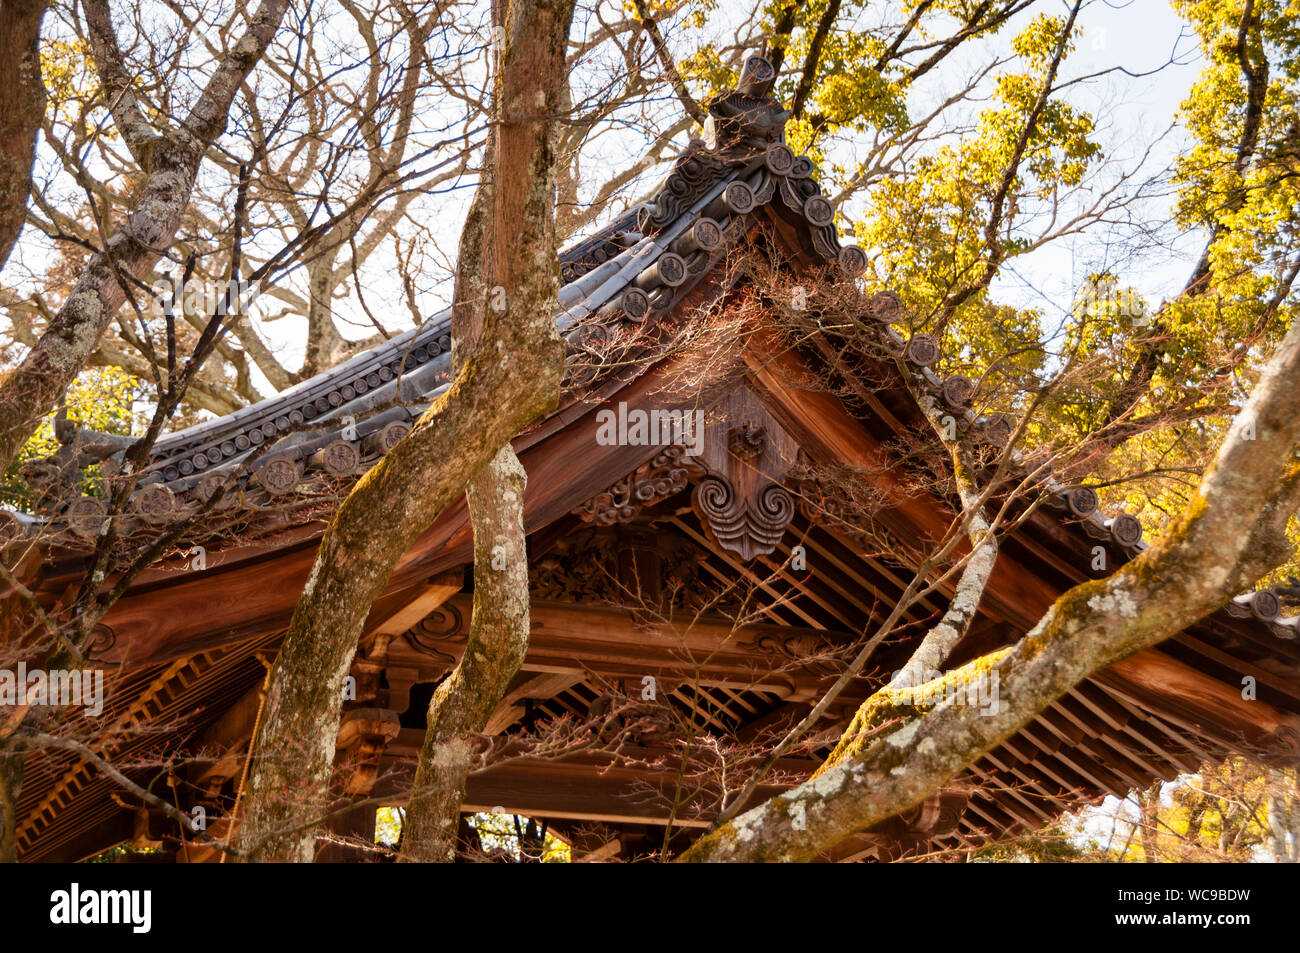 Roof of the Temple Bell building with Japanese clay roof tiles at Chishaku-in Temple in Kyoto, Japan. Stock Photo